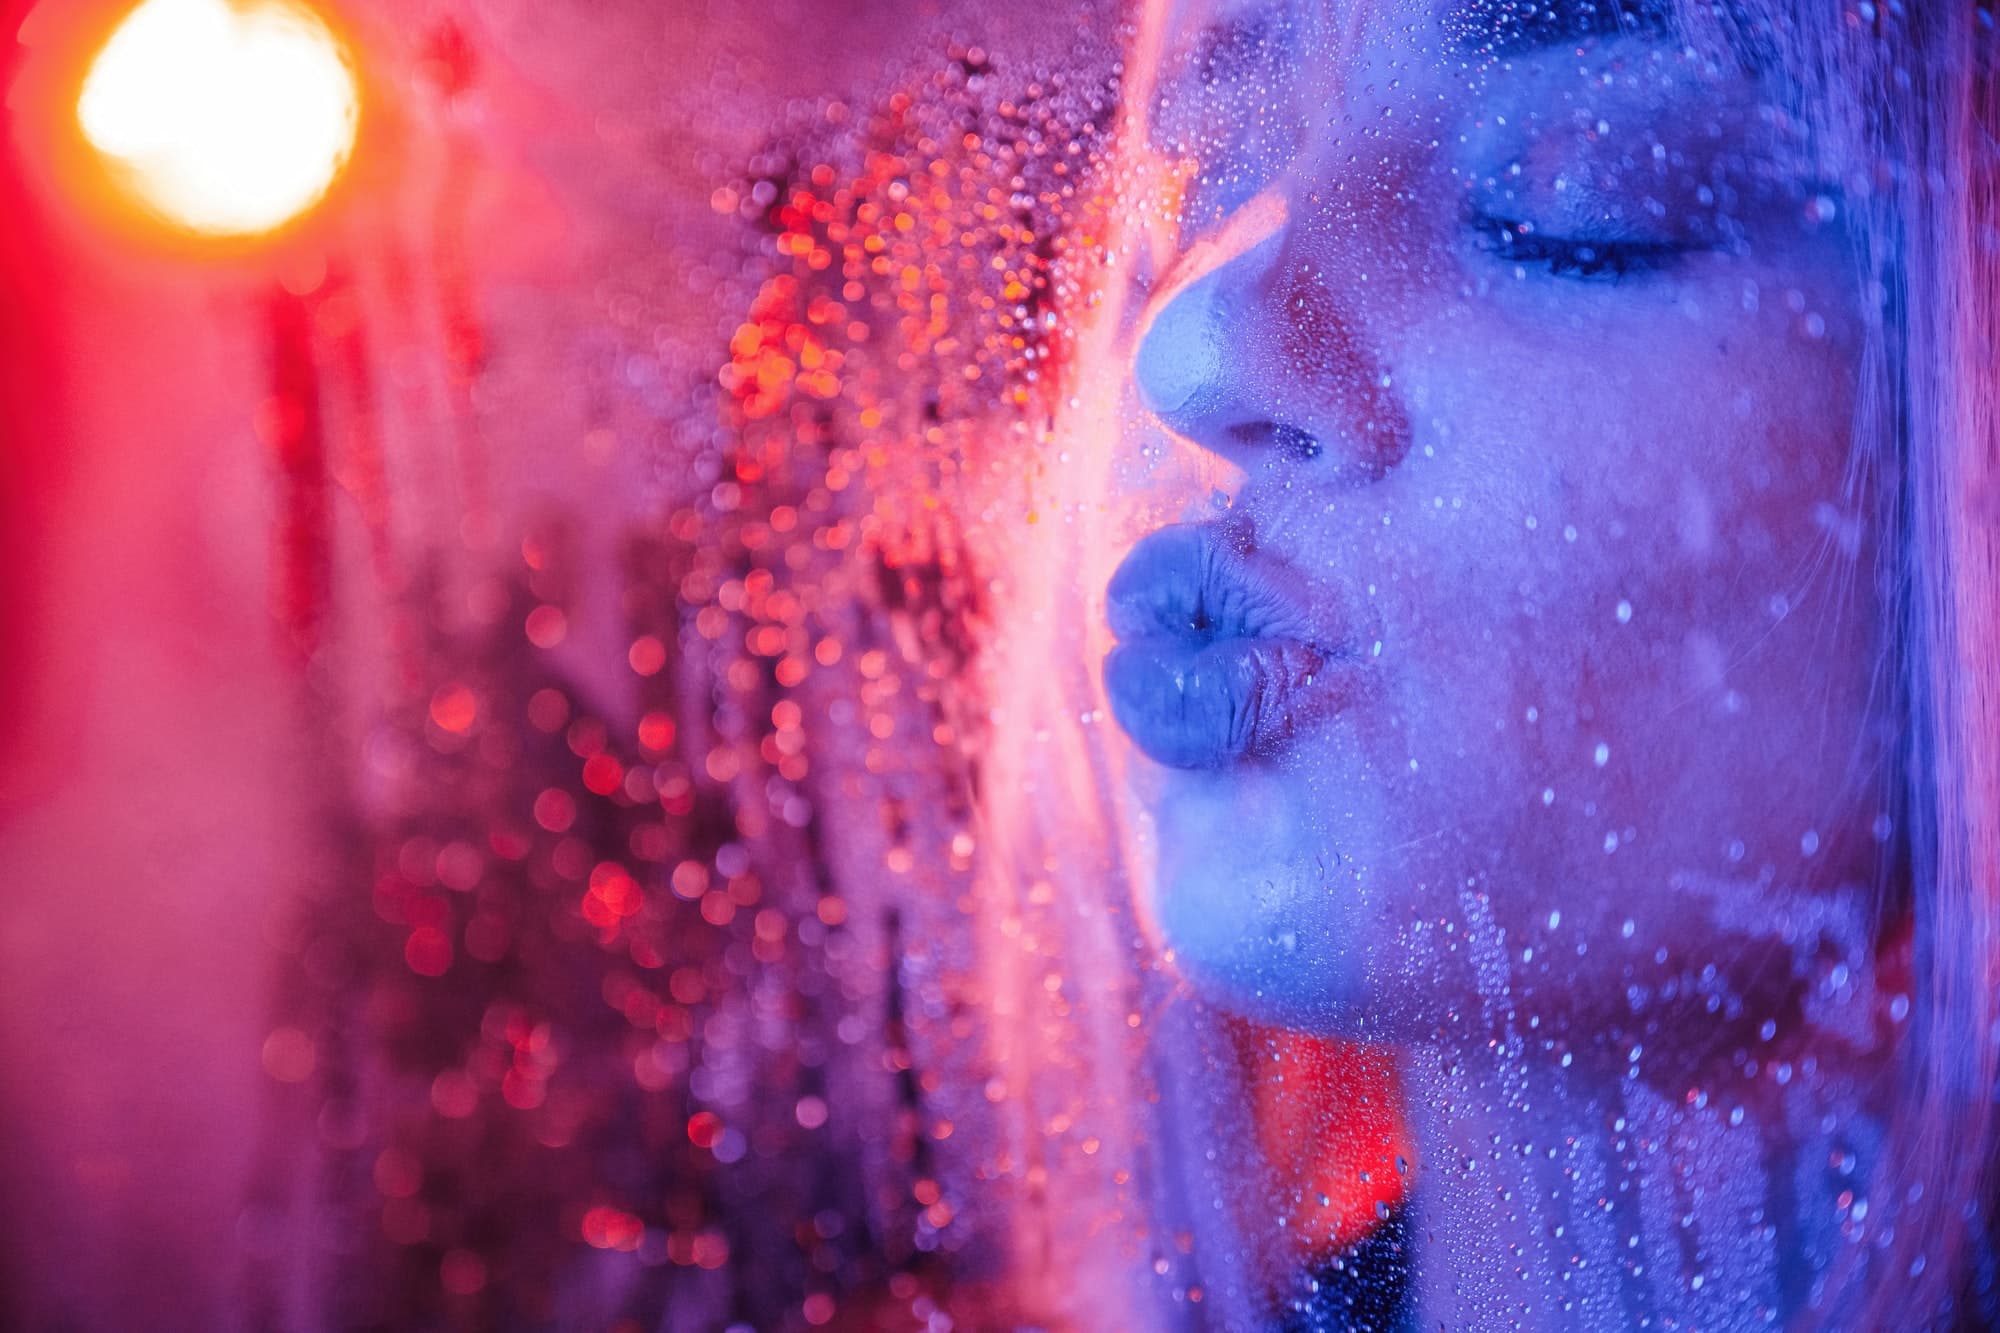 Kissing the surface. Stylish woman with white hair is behind wet transparent plastic sheet